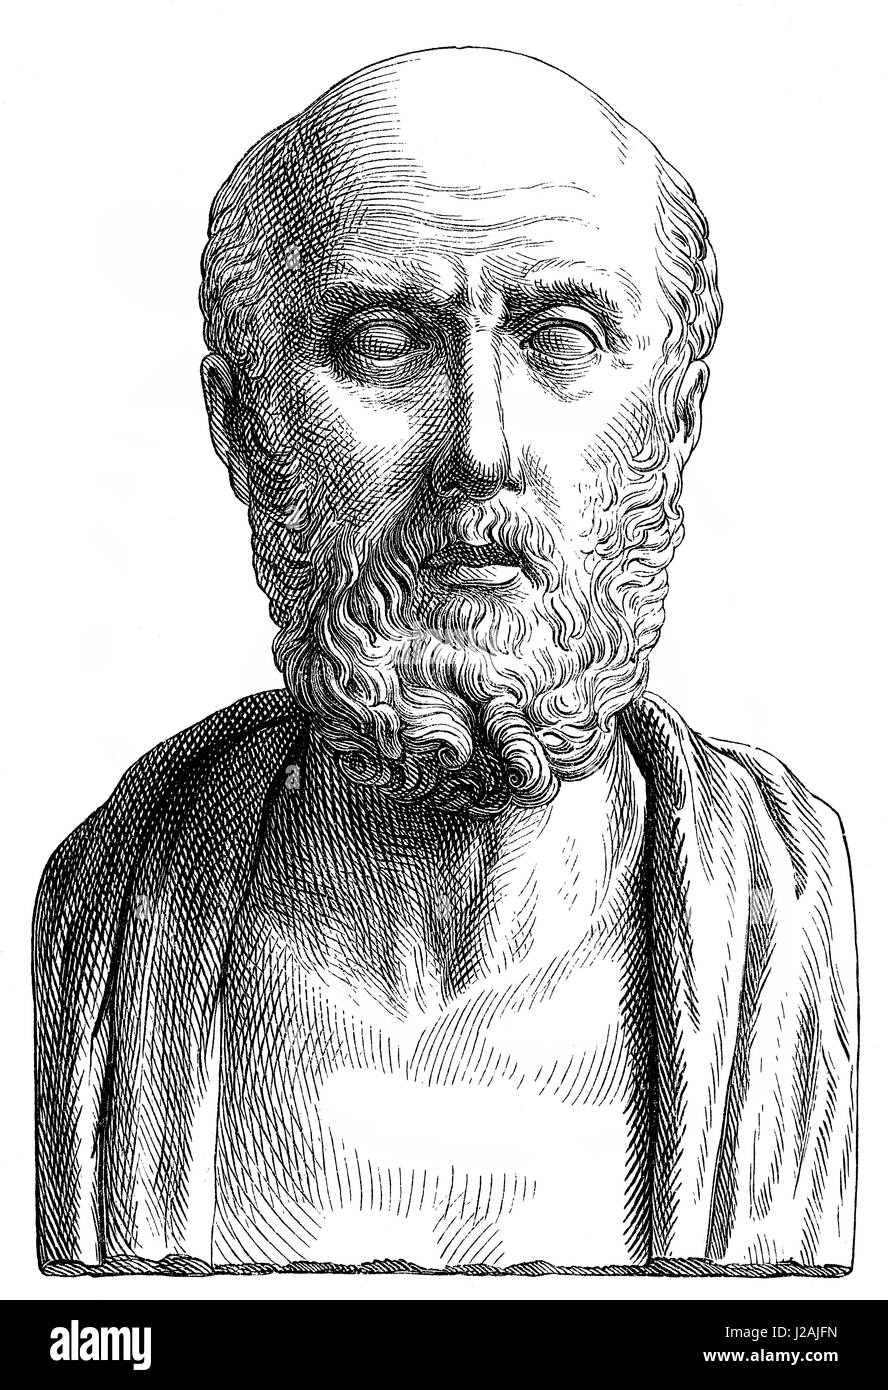 Hippocrates of Kos or Hippocrates II, c. 460-c. 370 BC, a Greek physician in Classical Greece Stock Photo